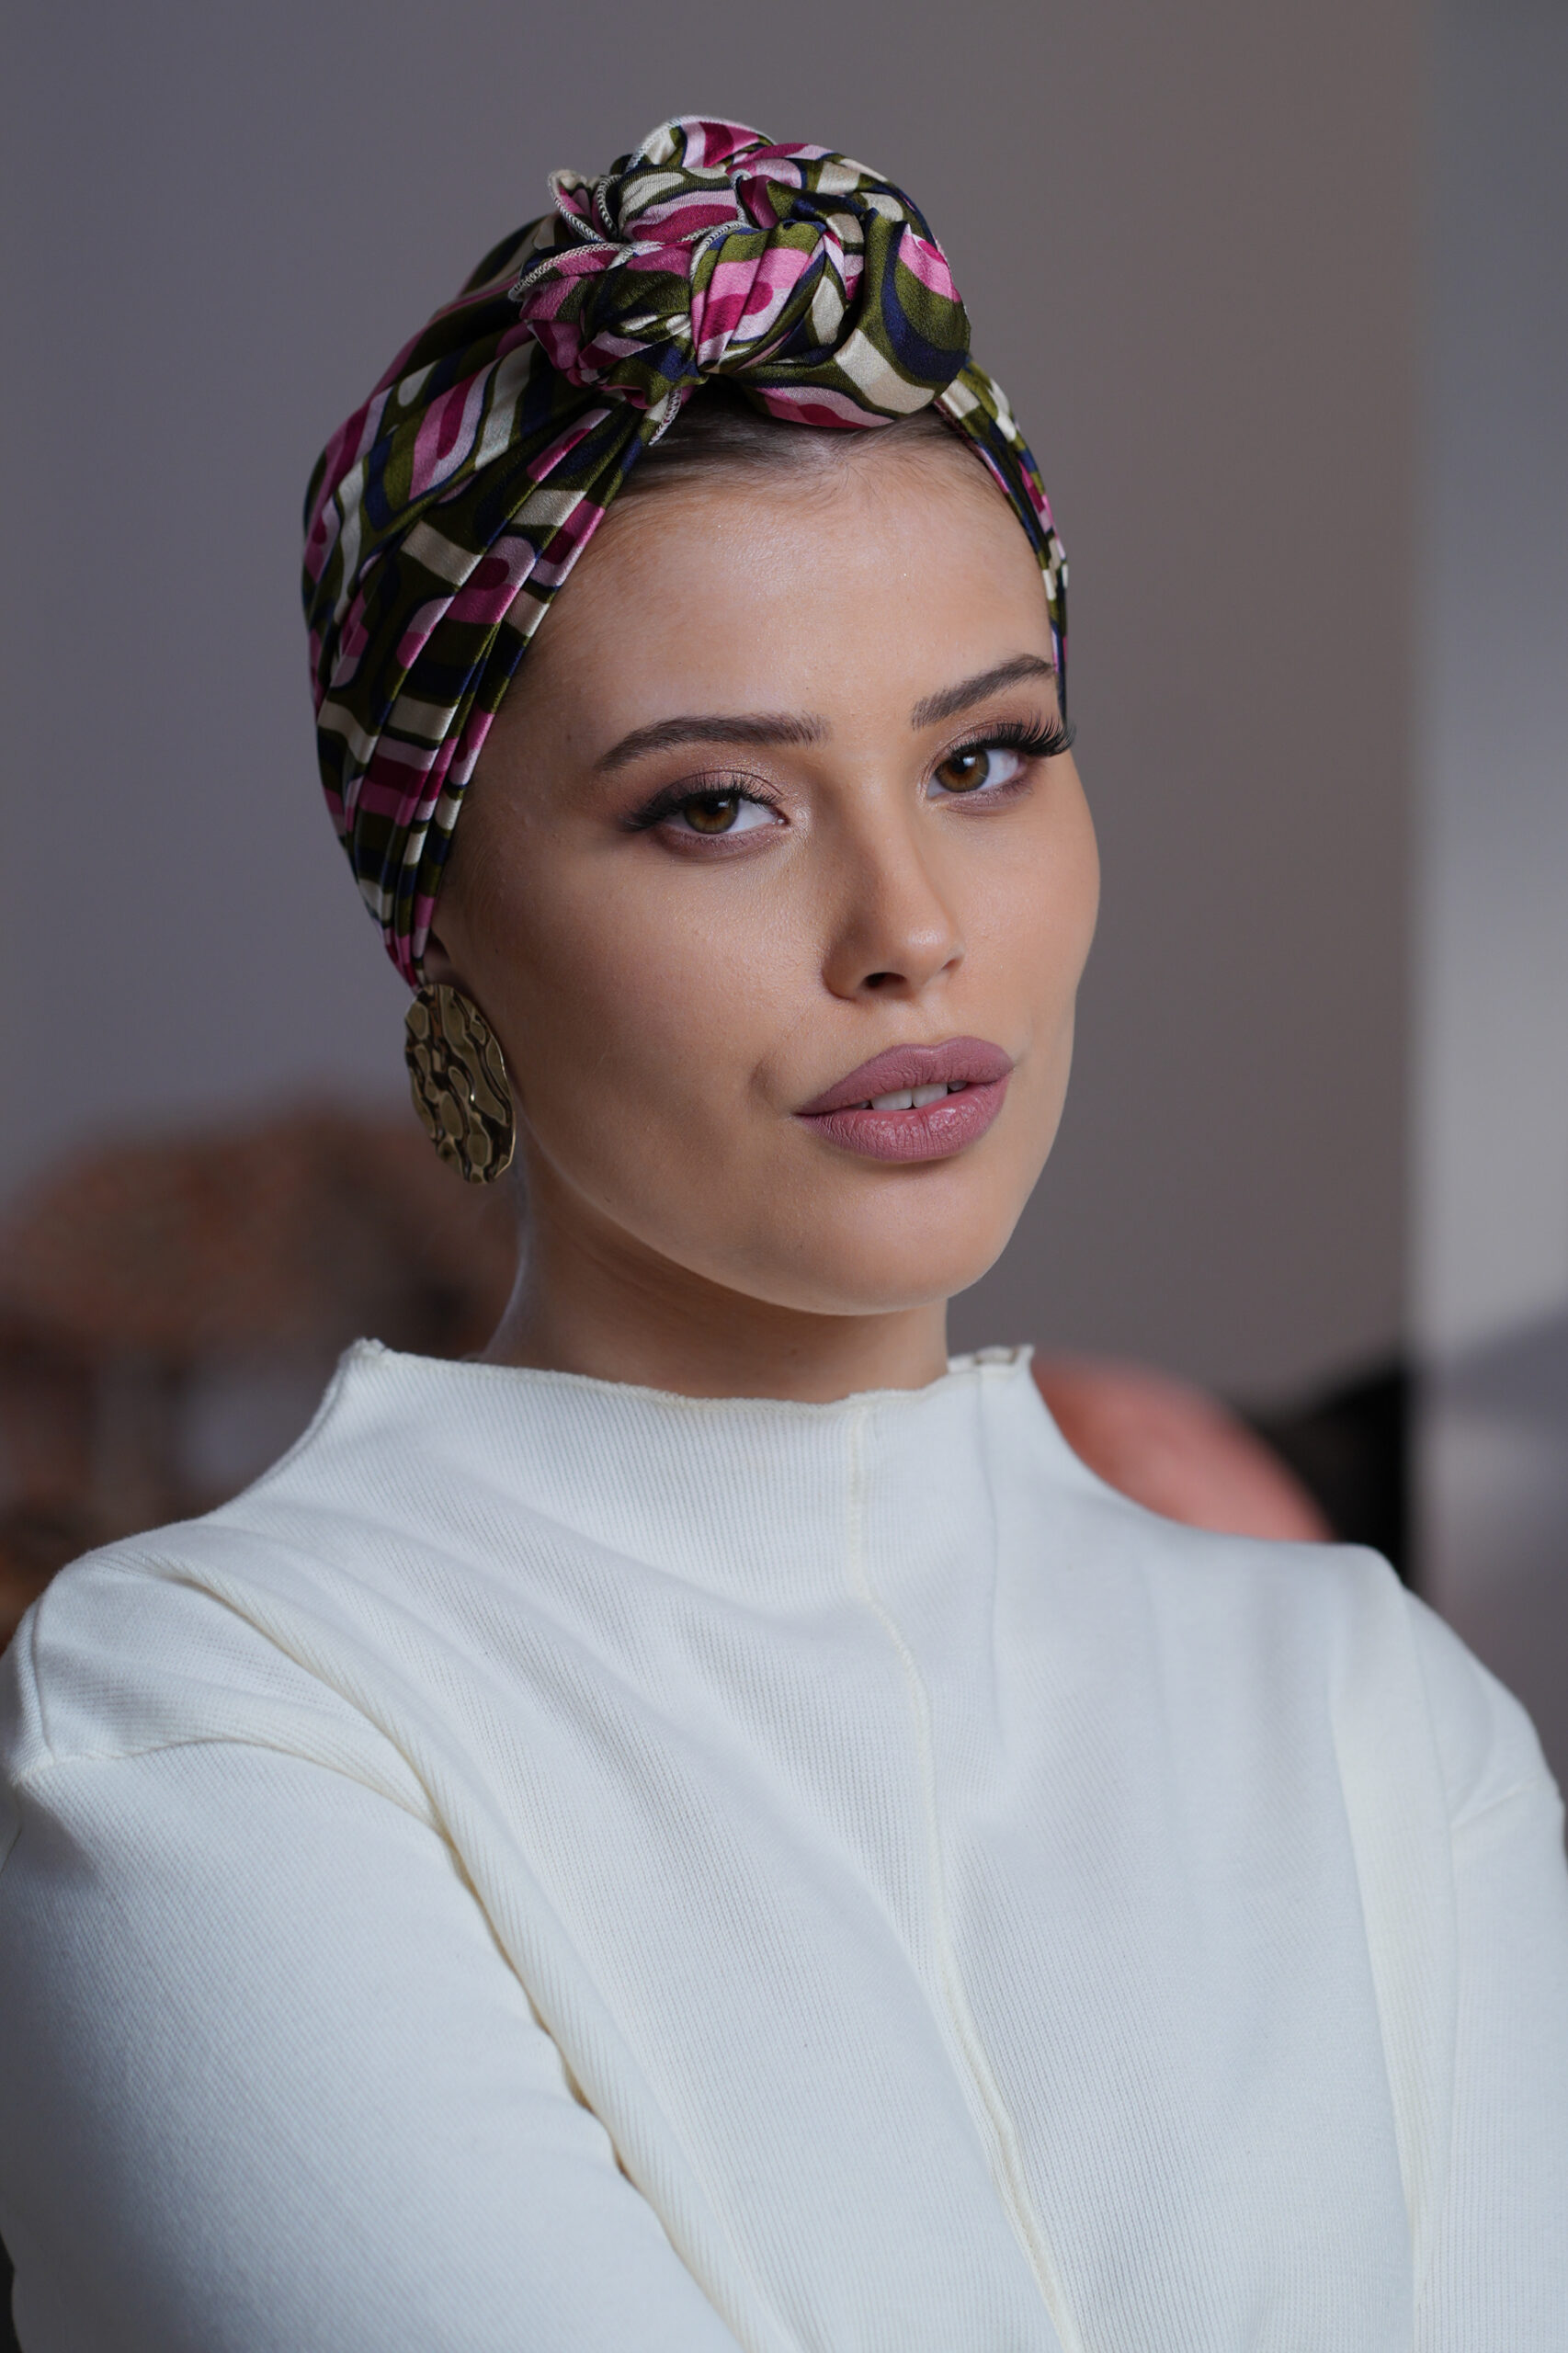 Printed pink and green headscarf